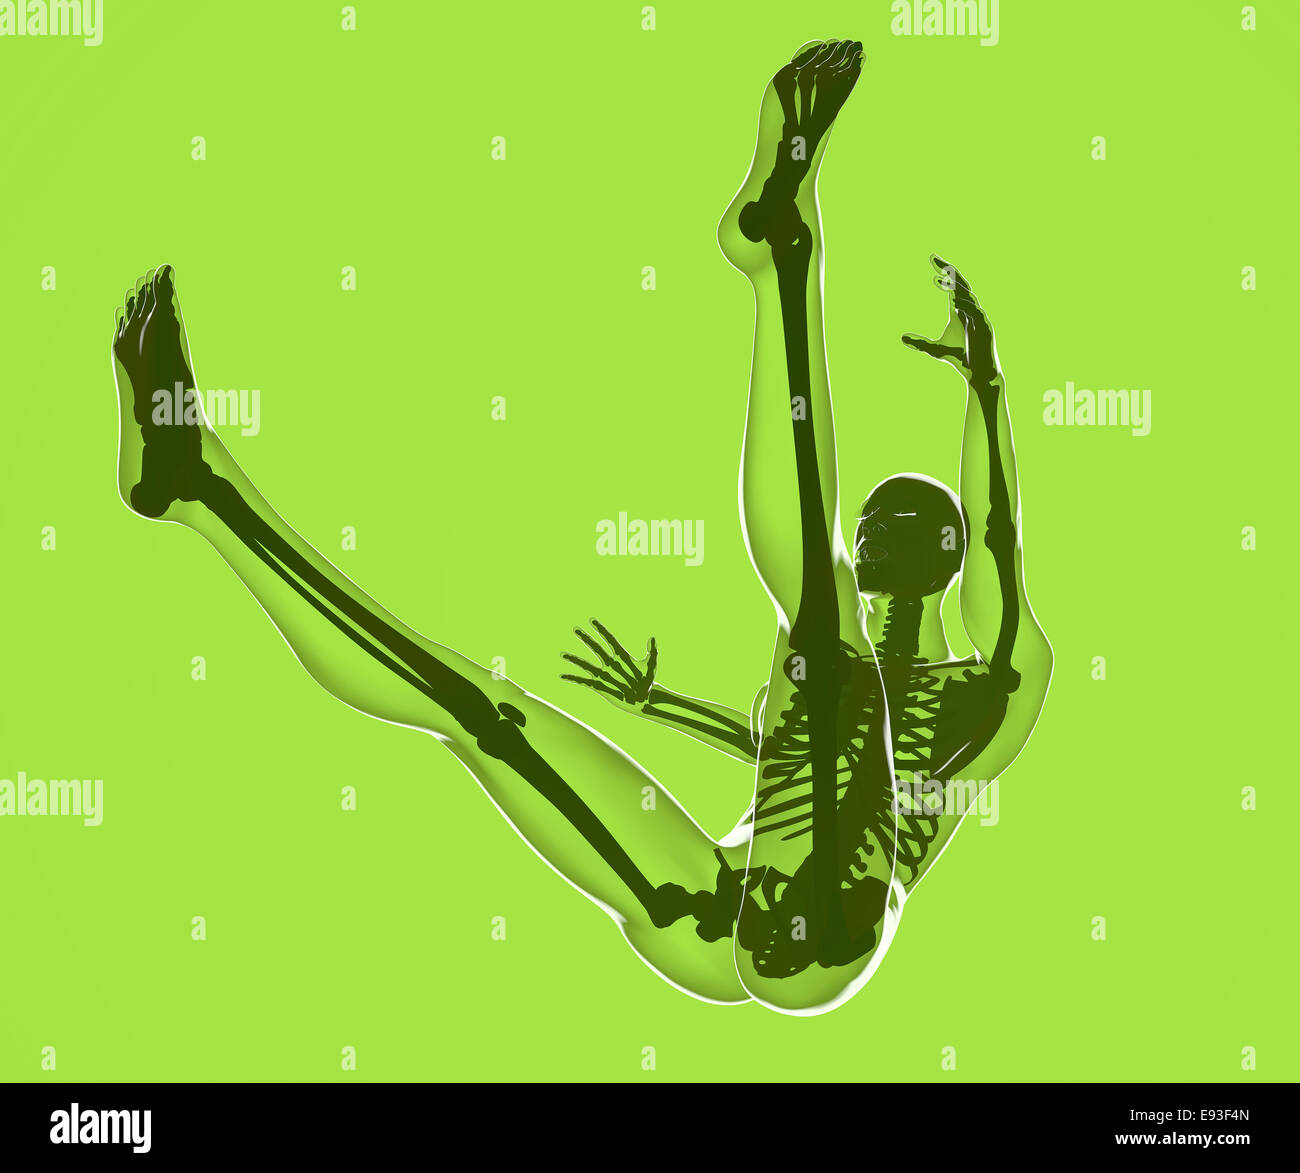 3d Fall of a human body seen on x-rays Stock Photo